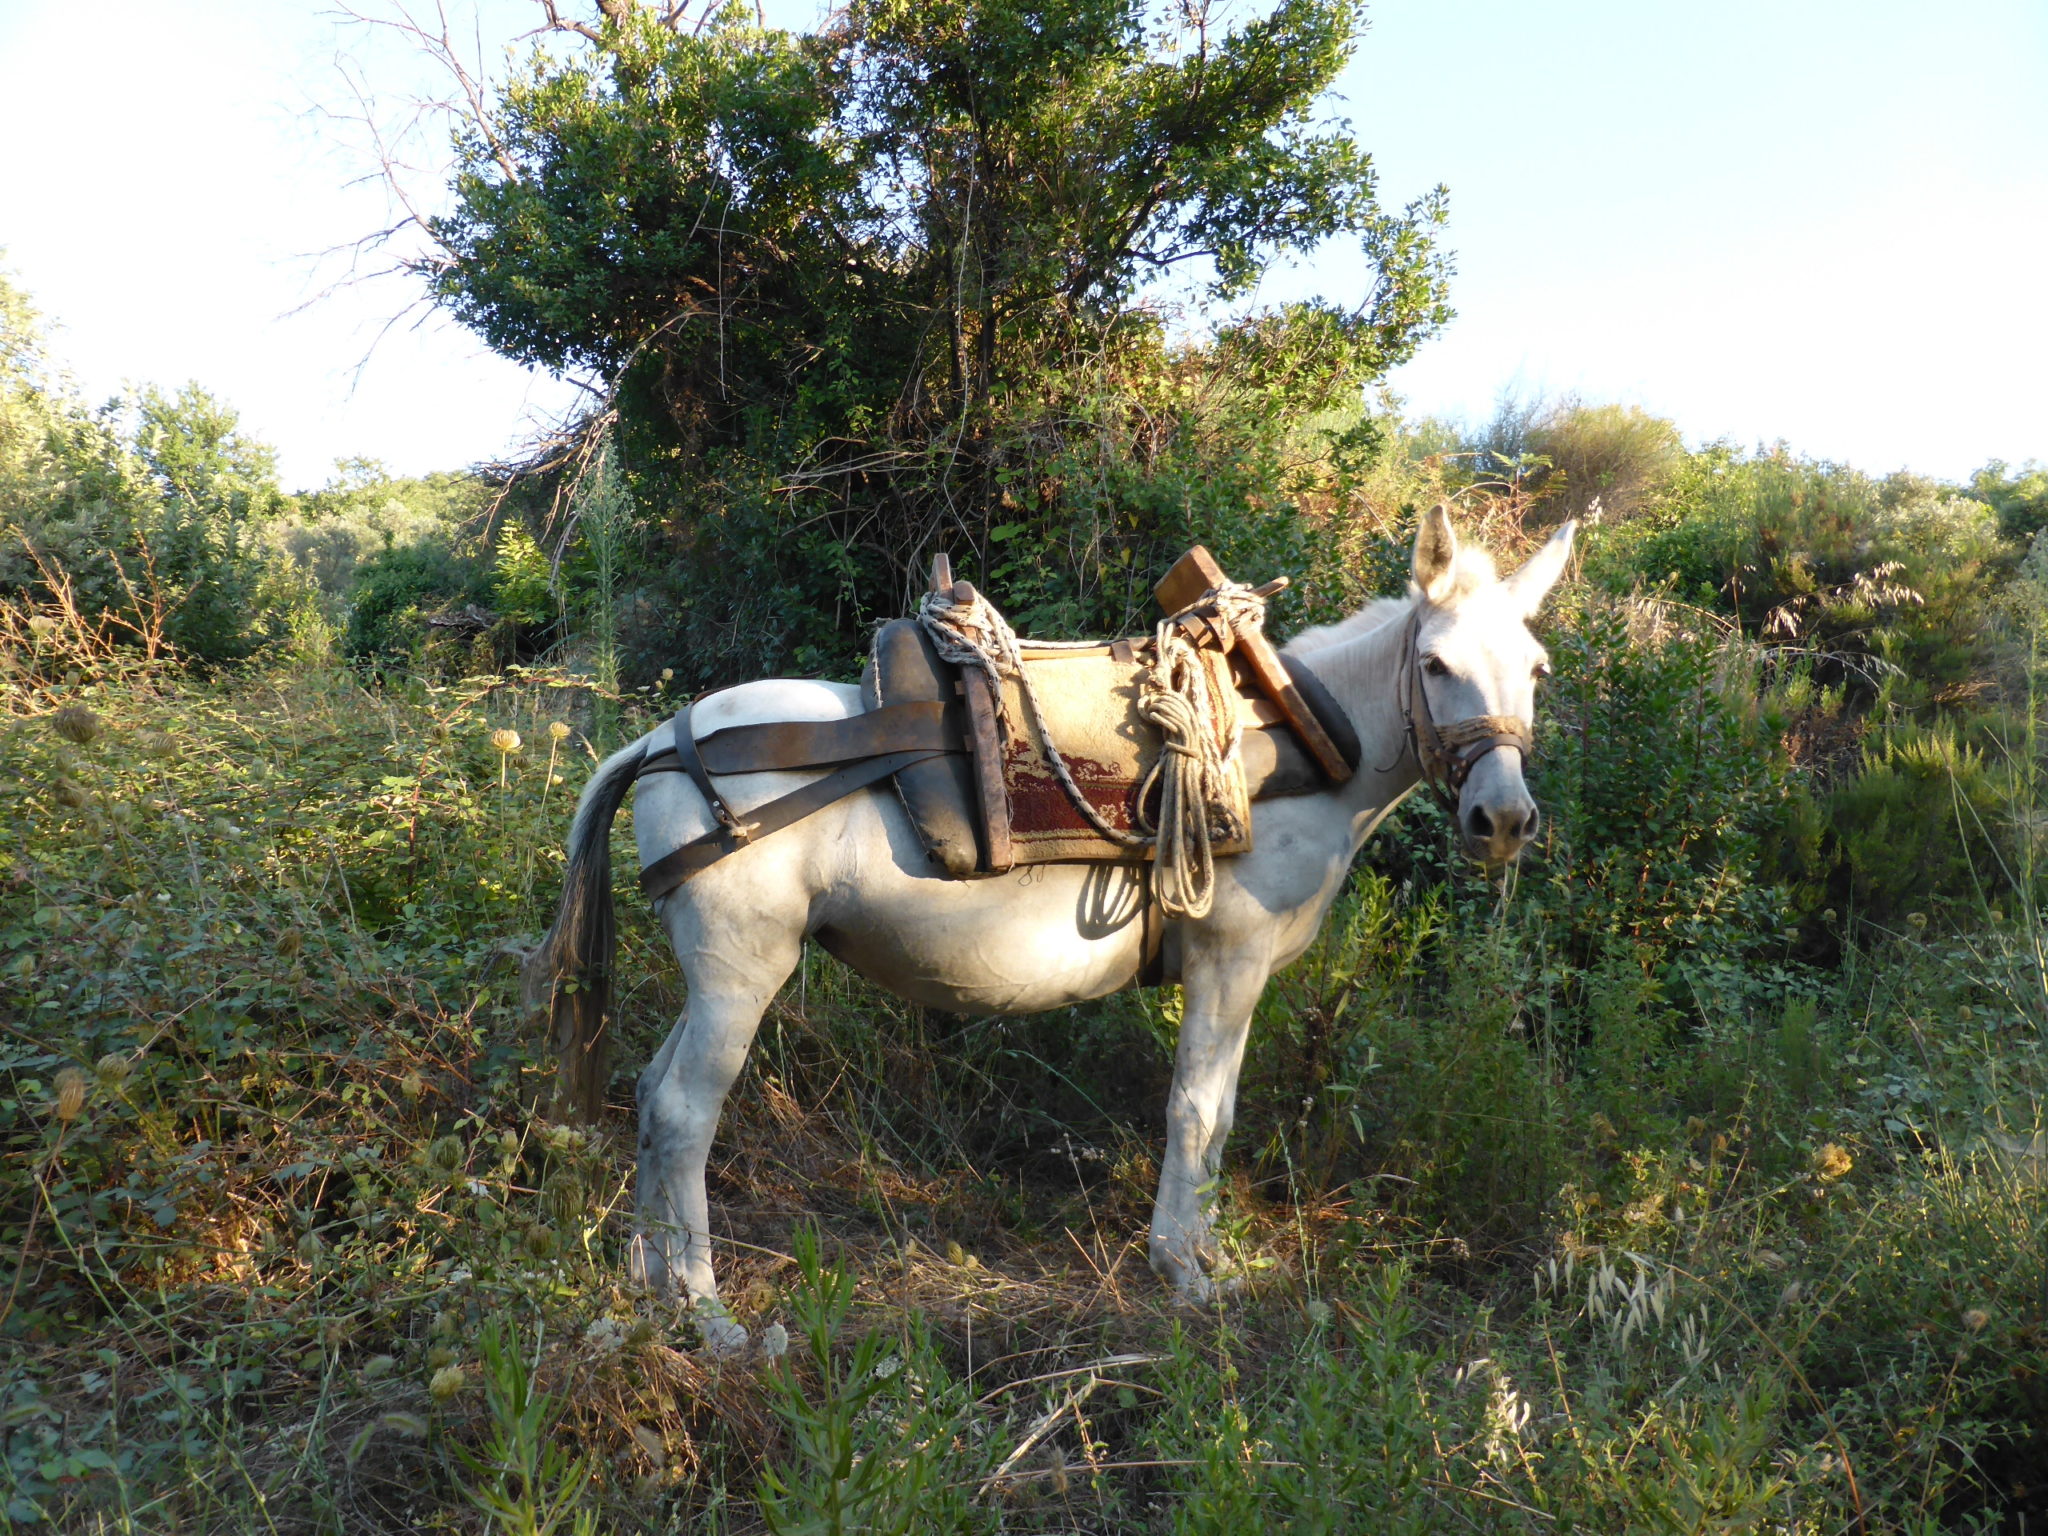 authentic Greece, where you can still find working mules helping to gather winter wood